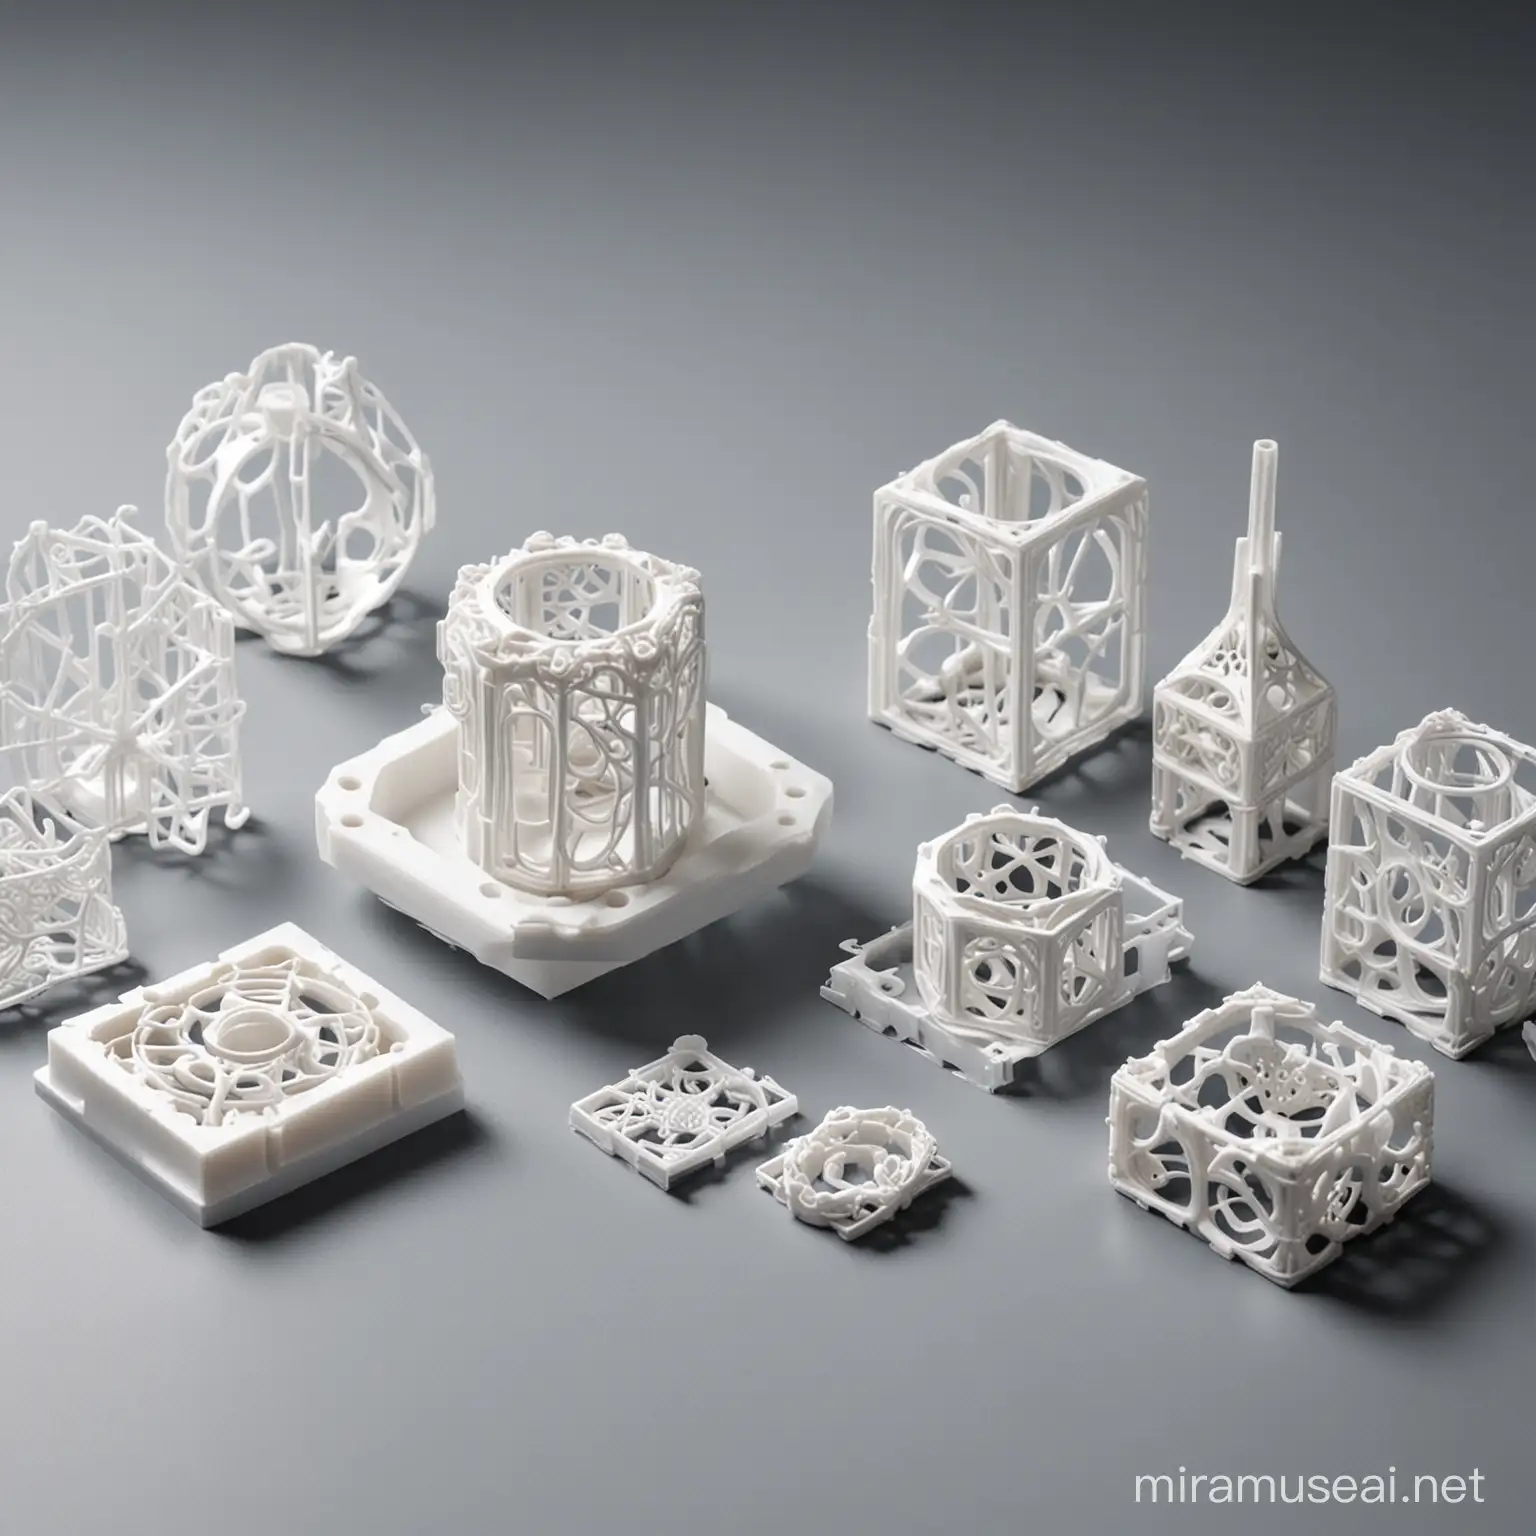 High precision 3D printed objects 